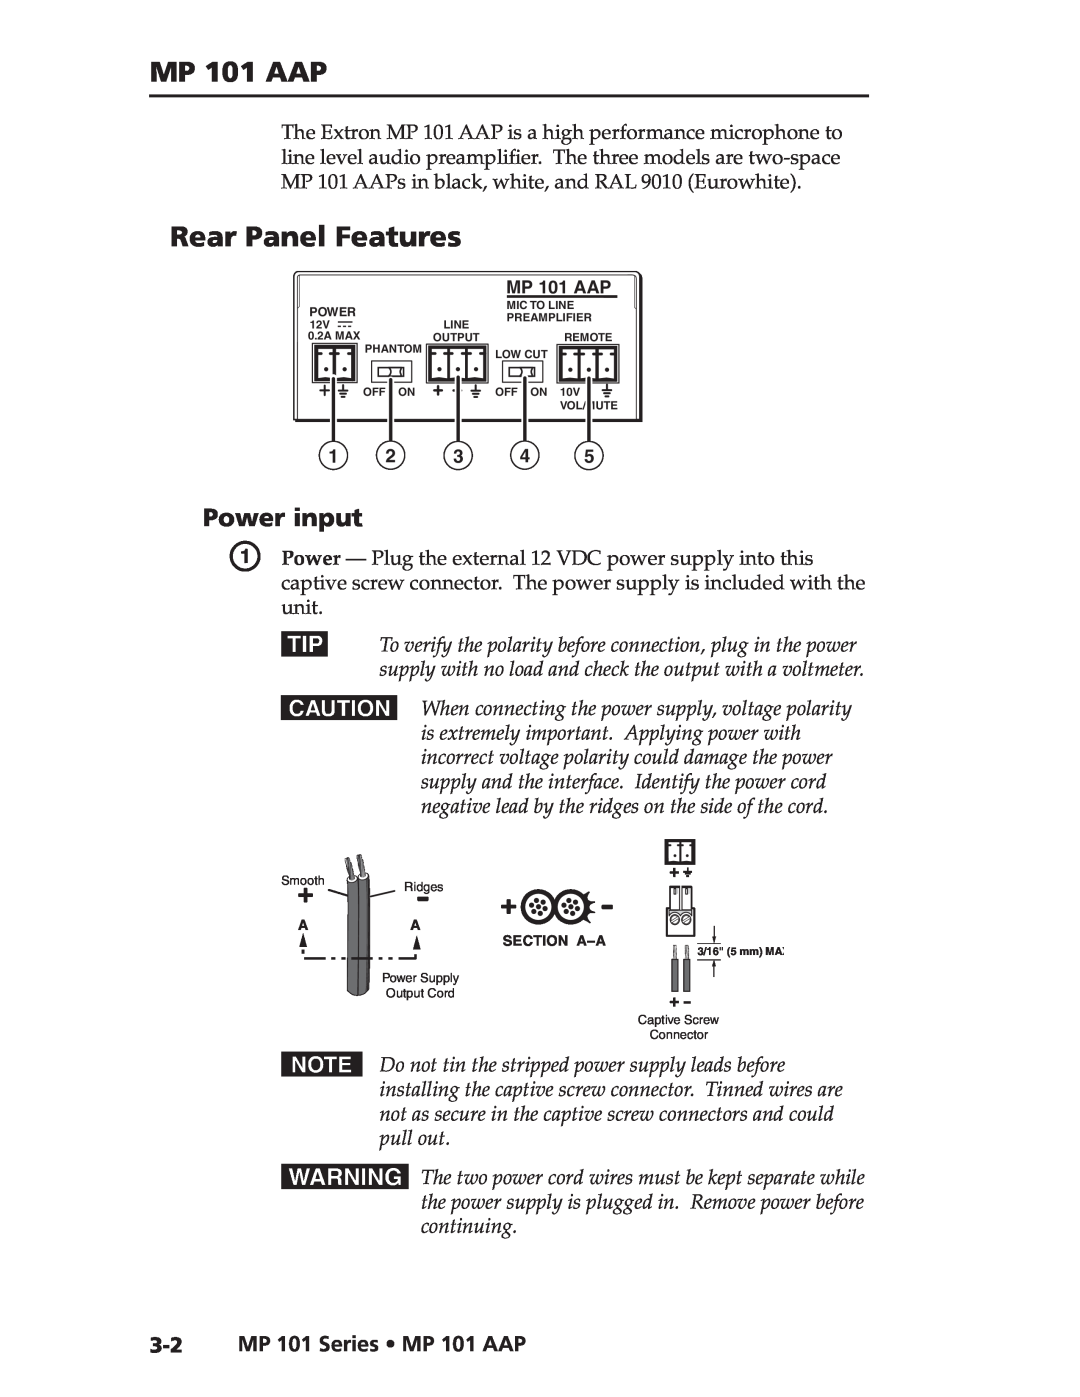 Extron electronic user manual continuing, 3-2MP 101 Series MP 101 AAP, Rear Panel Features, Power input 